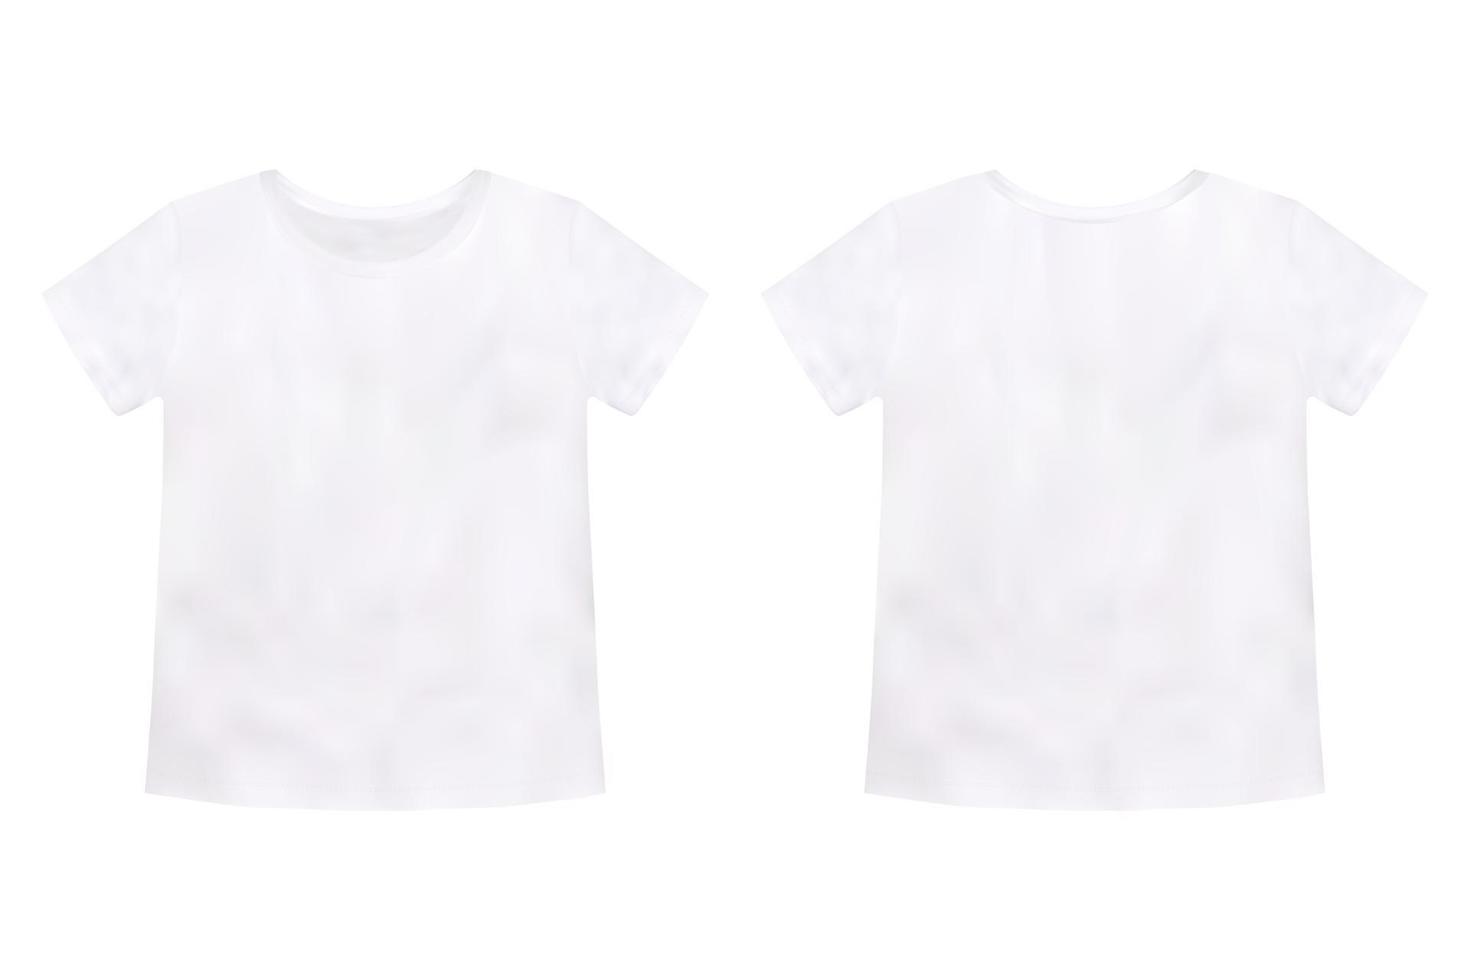 Children's t-shirt mockup isolated on white background. Unisex tee template vector